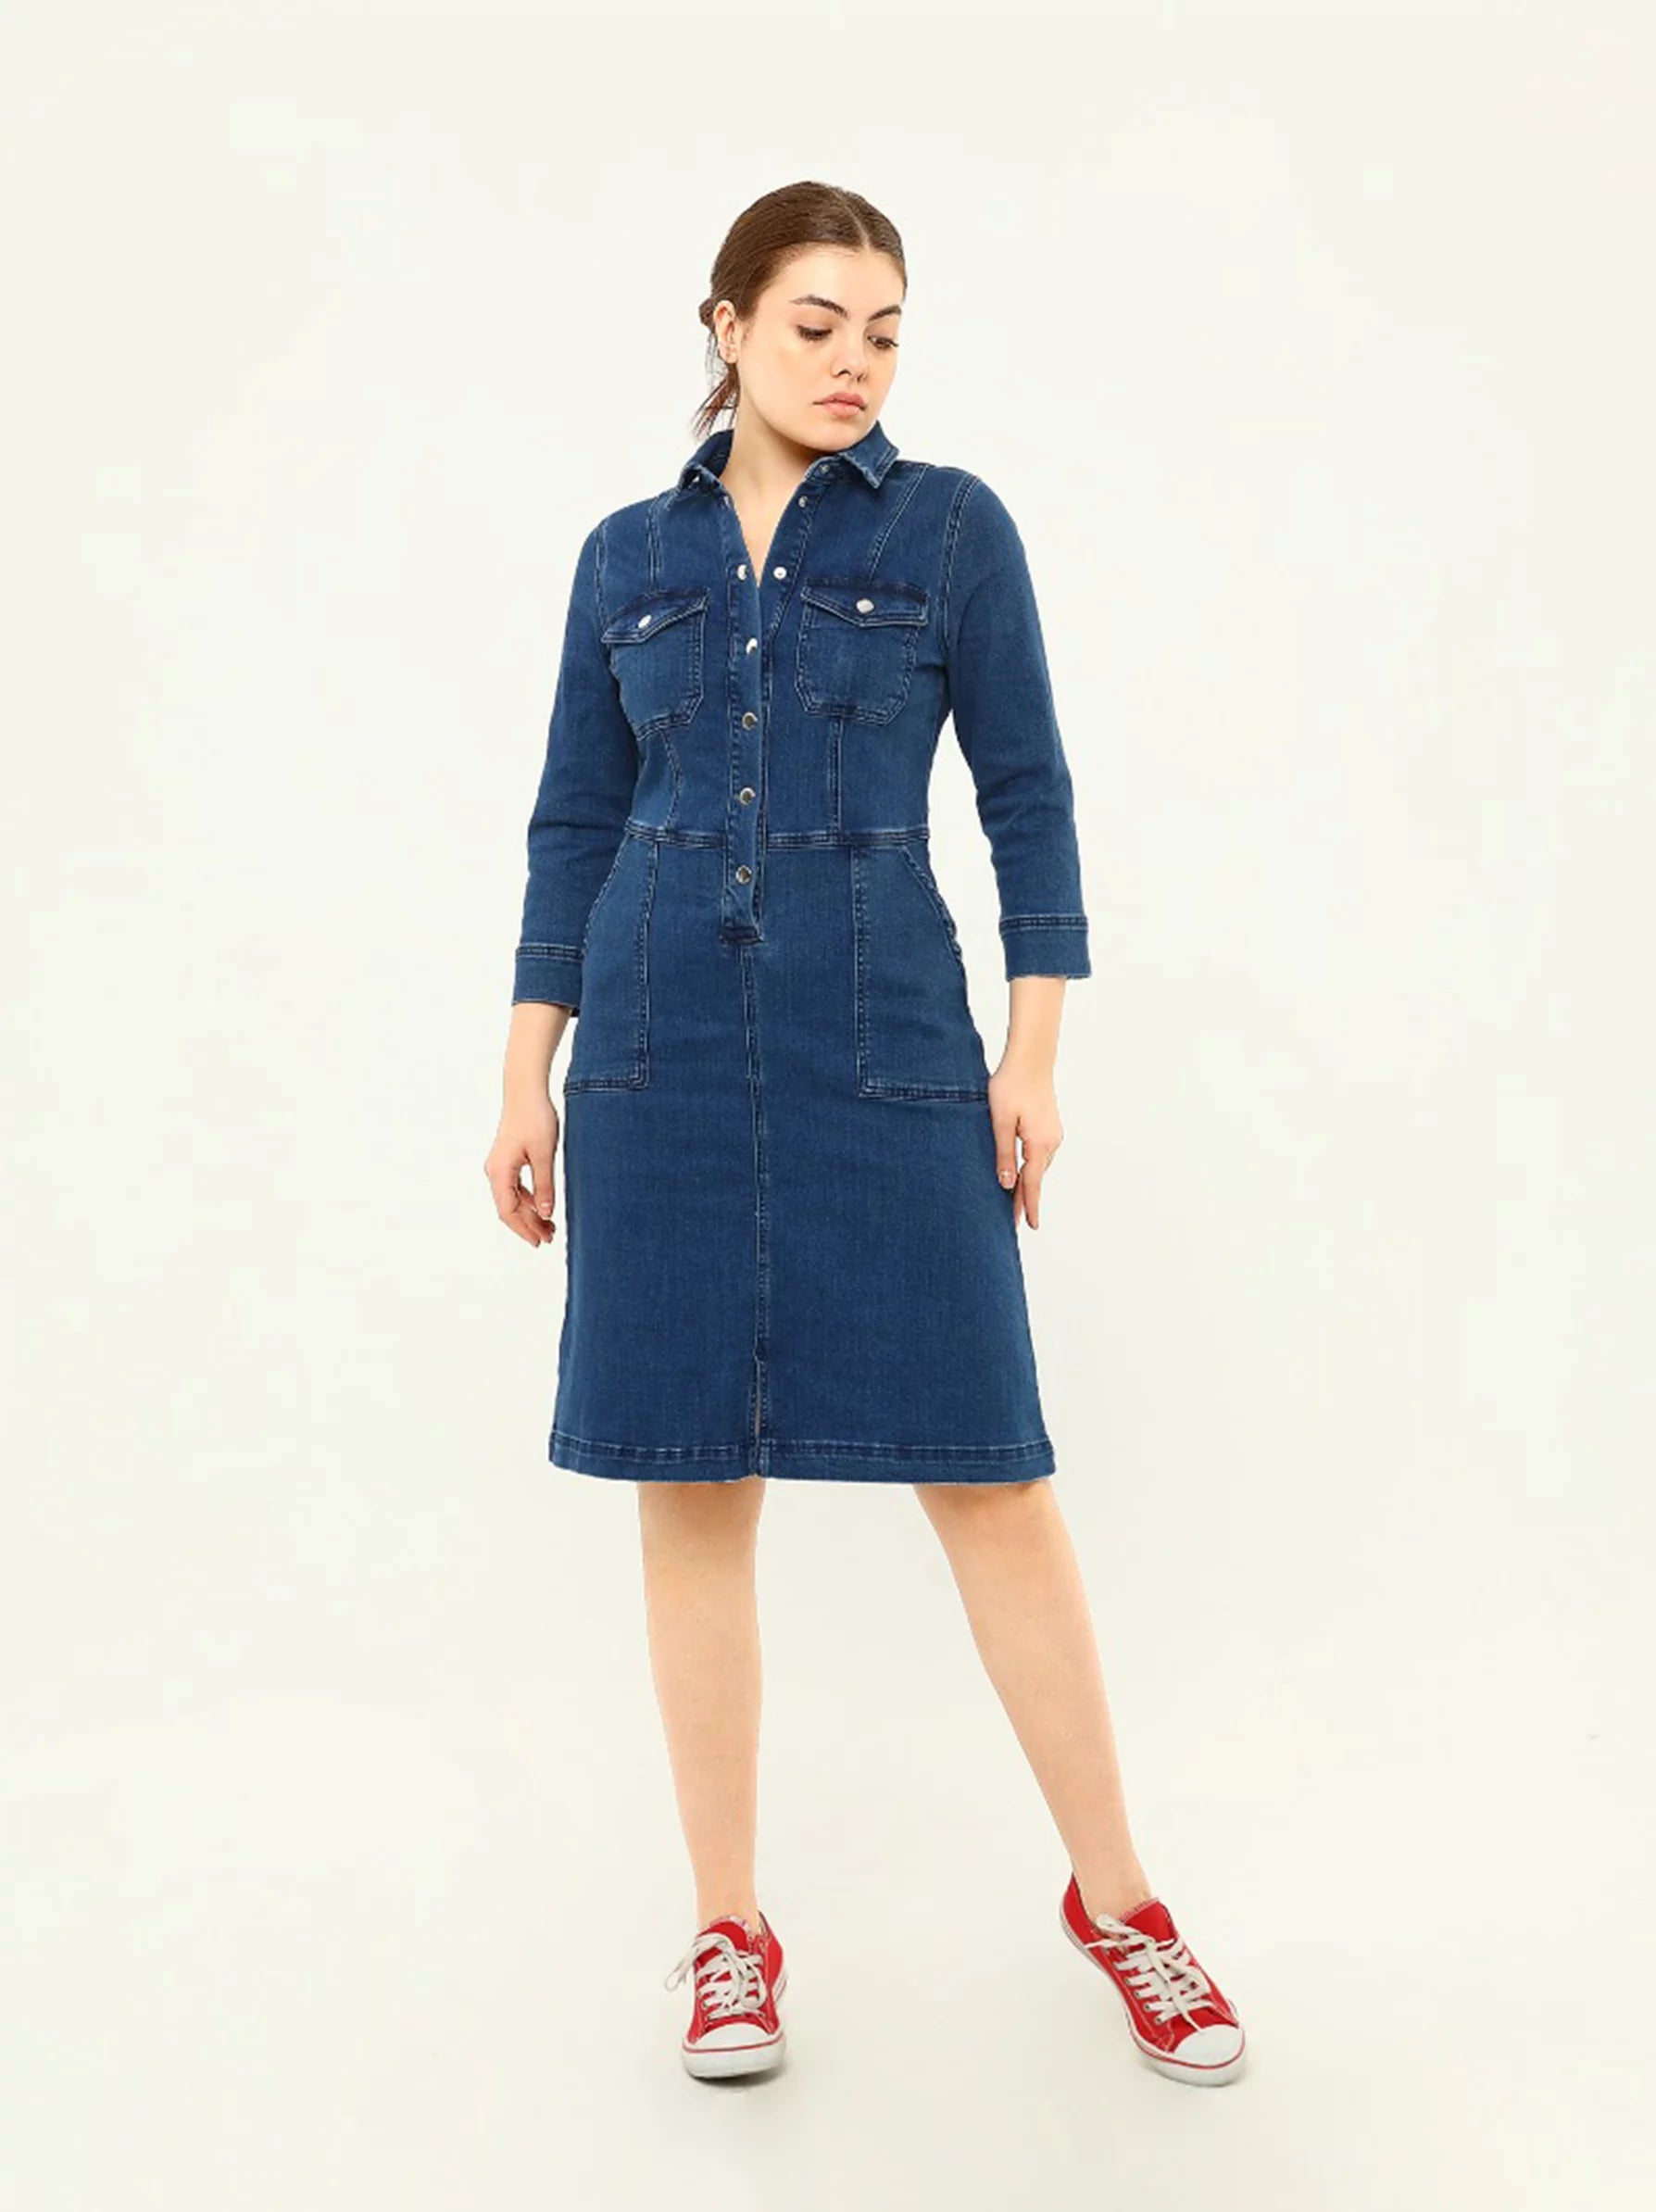 Sewing for Spring: my denim shirt dress - Six Mignons